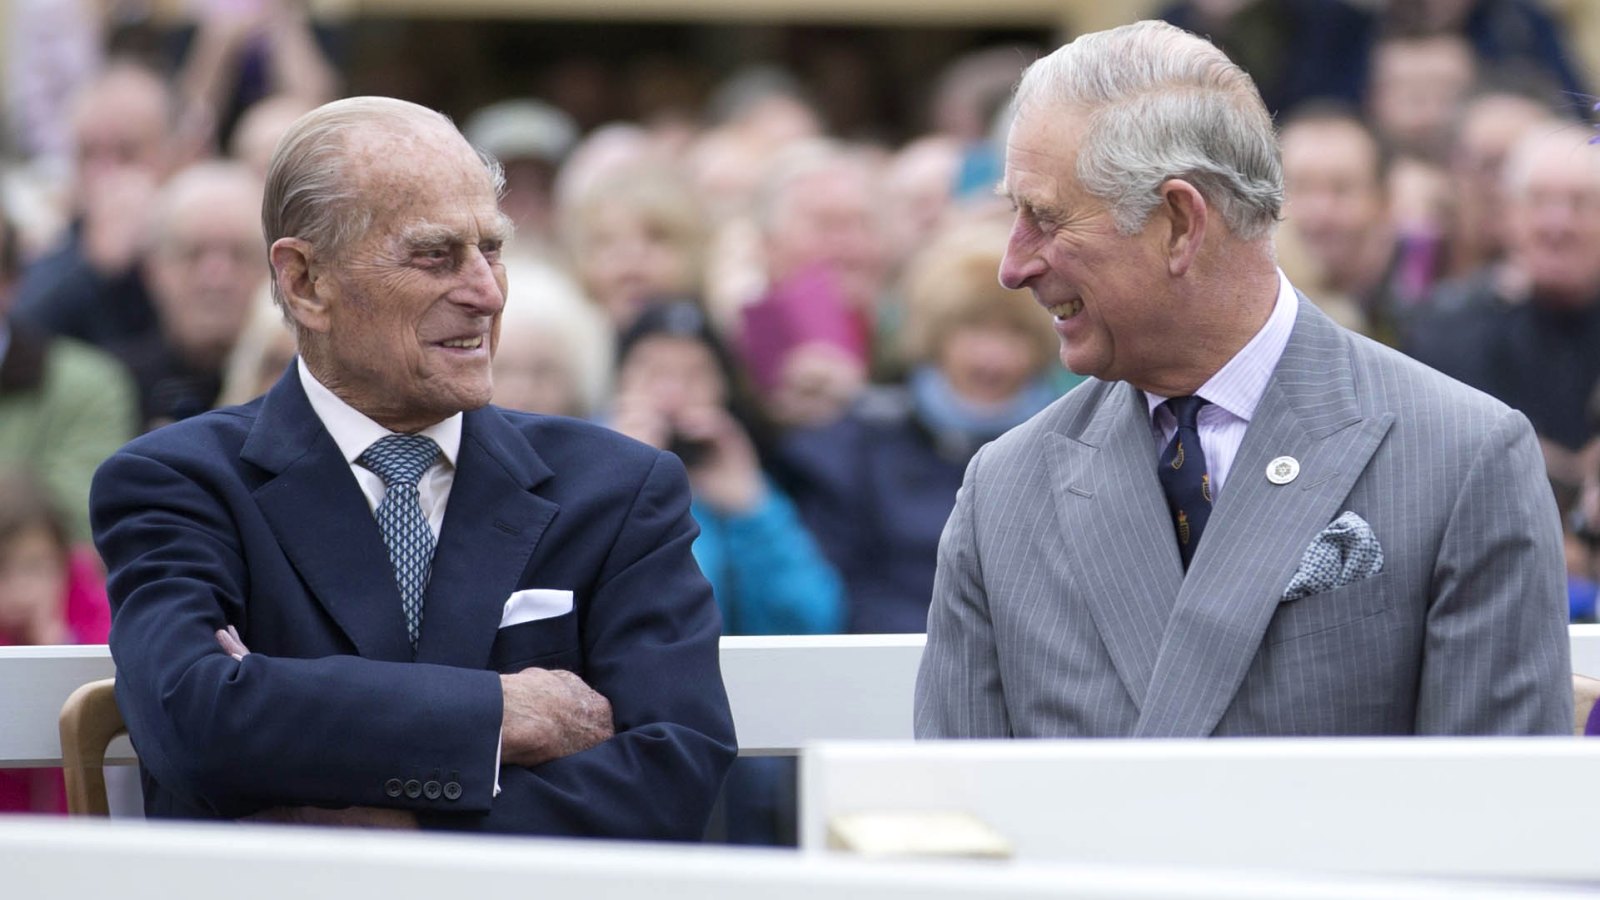 Prince Charles Reveals His Final Conversation With Late Prince Philip in BBC Documentary